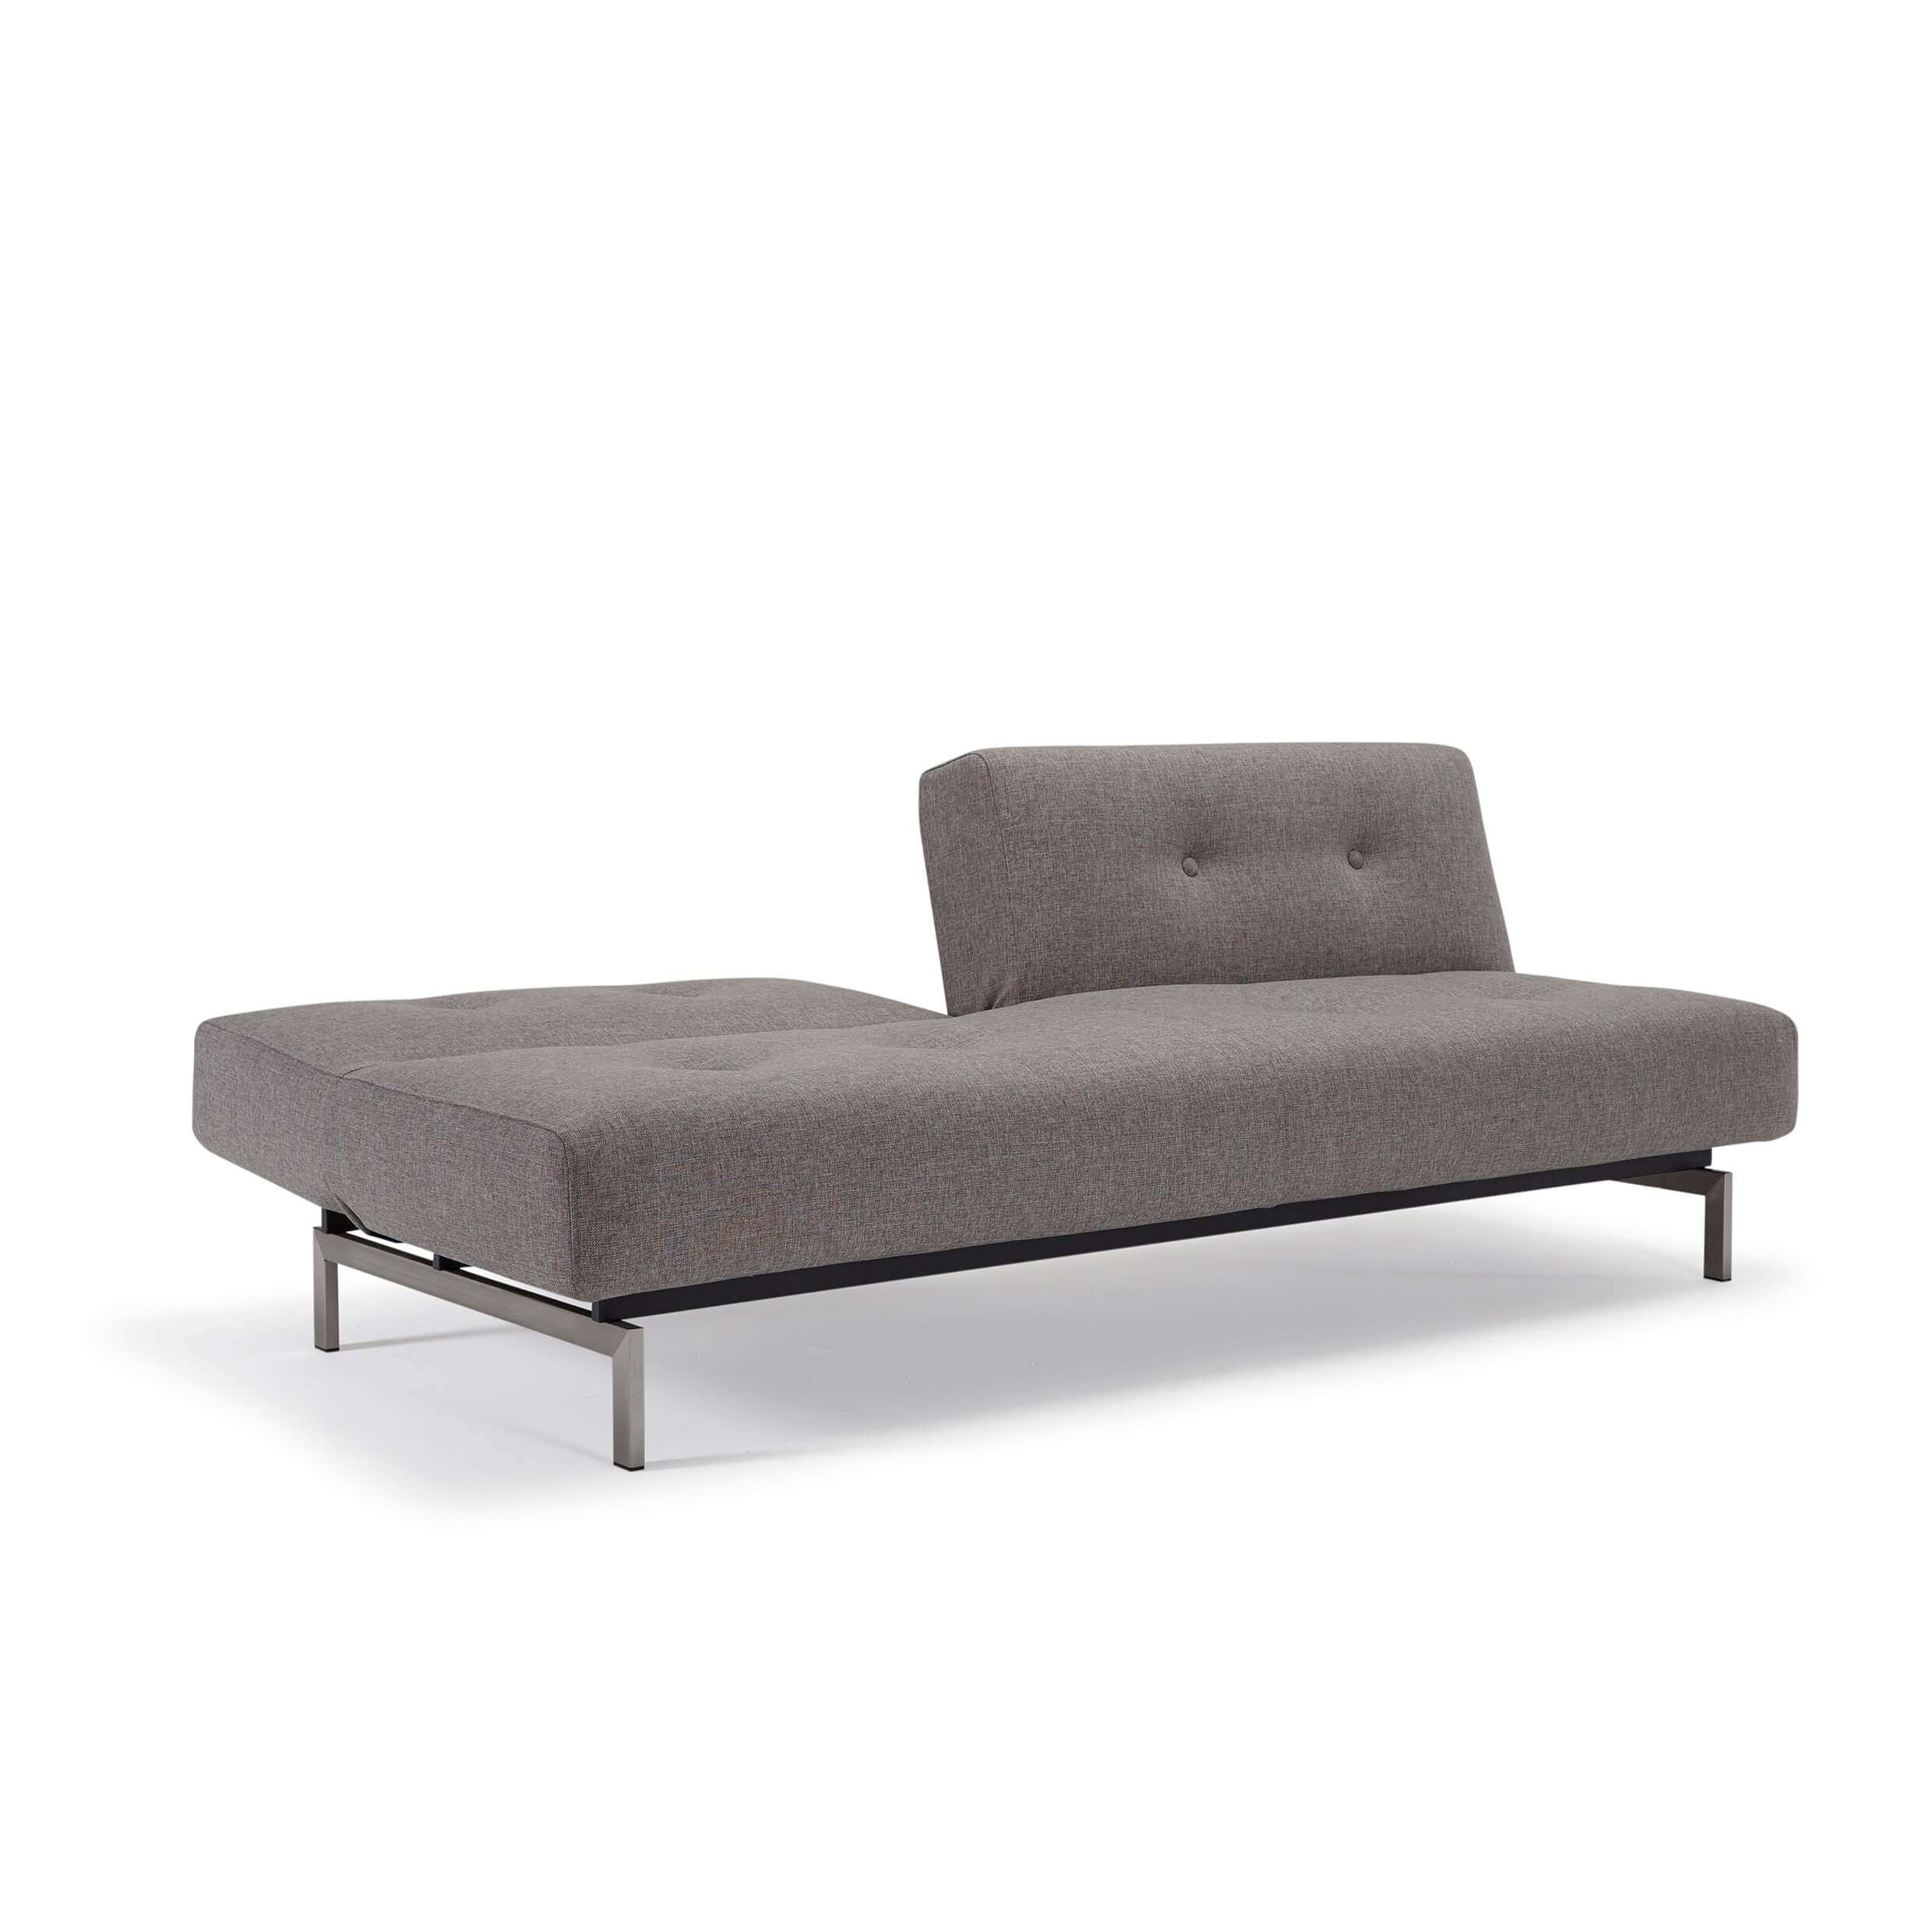 Convertible futon sofa bed partially unfolded view